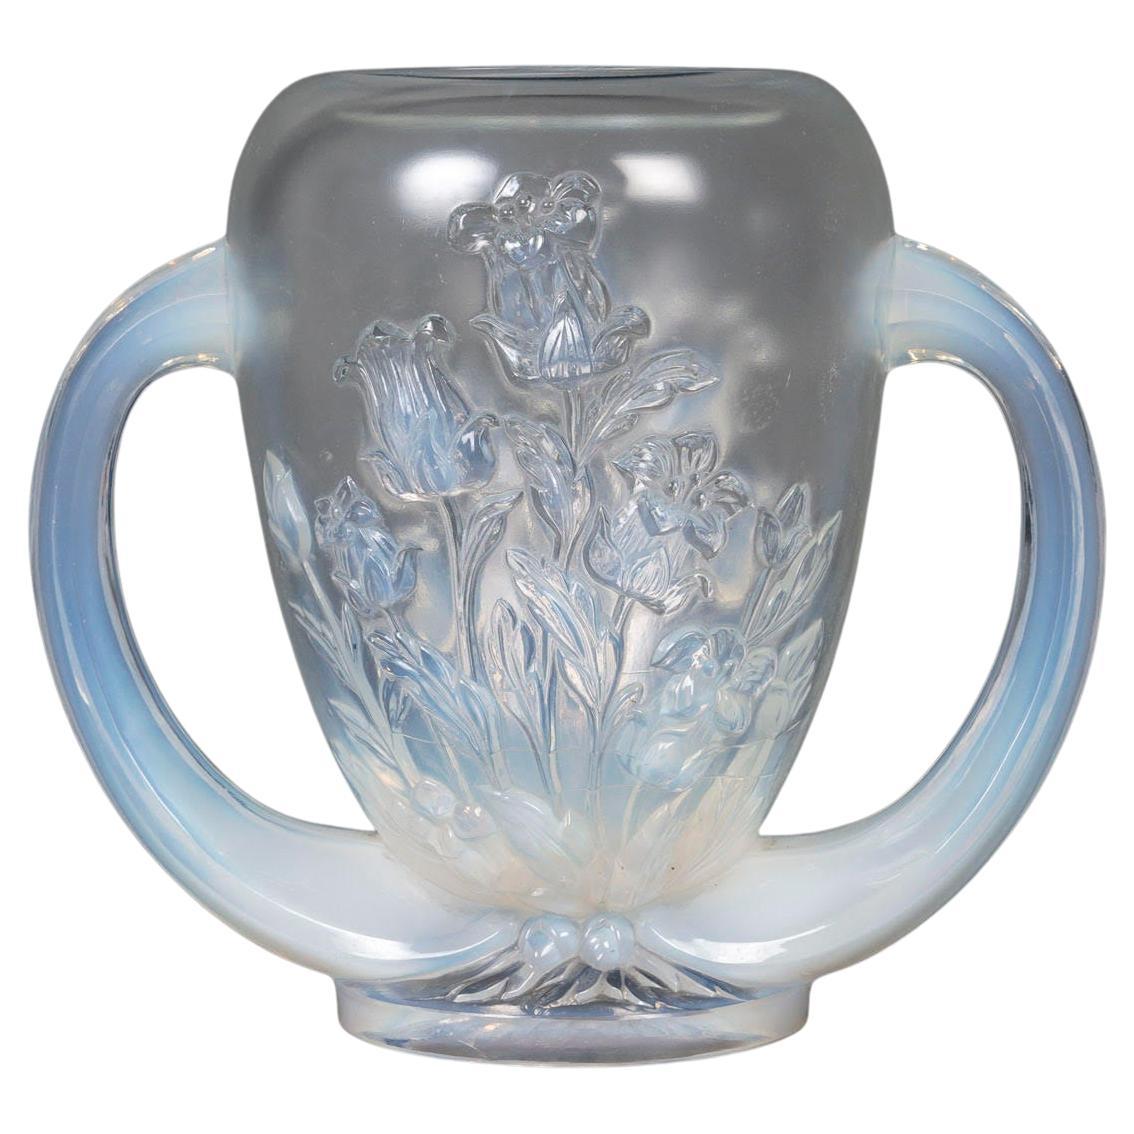 Opalescent Glass Vase from Verlys, Early 20th Century.